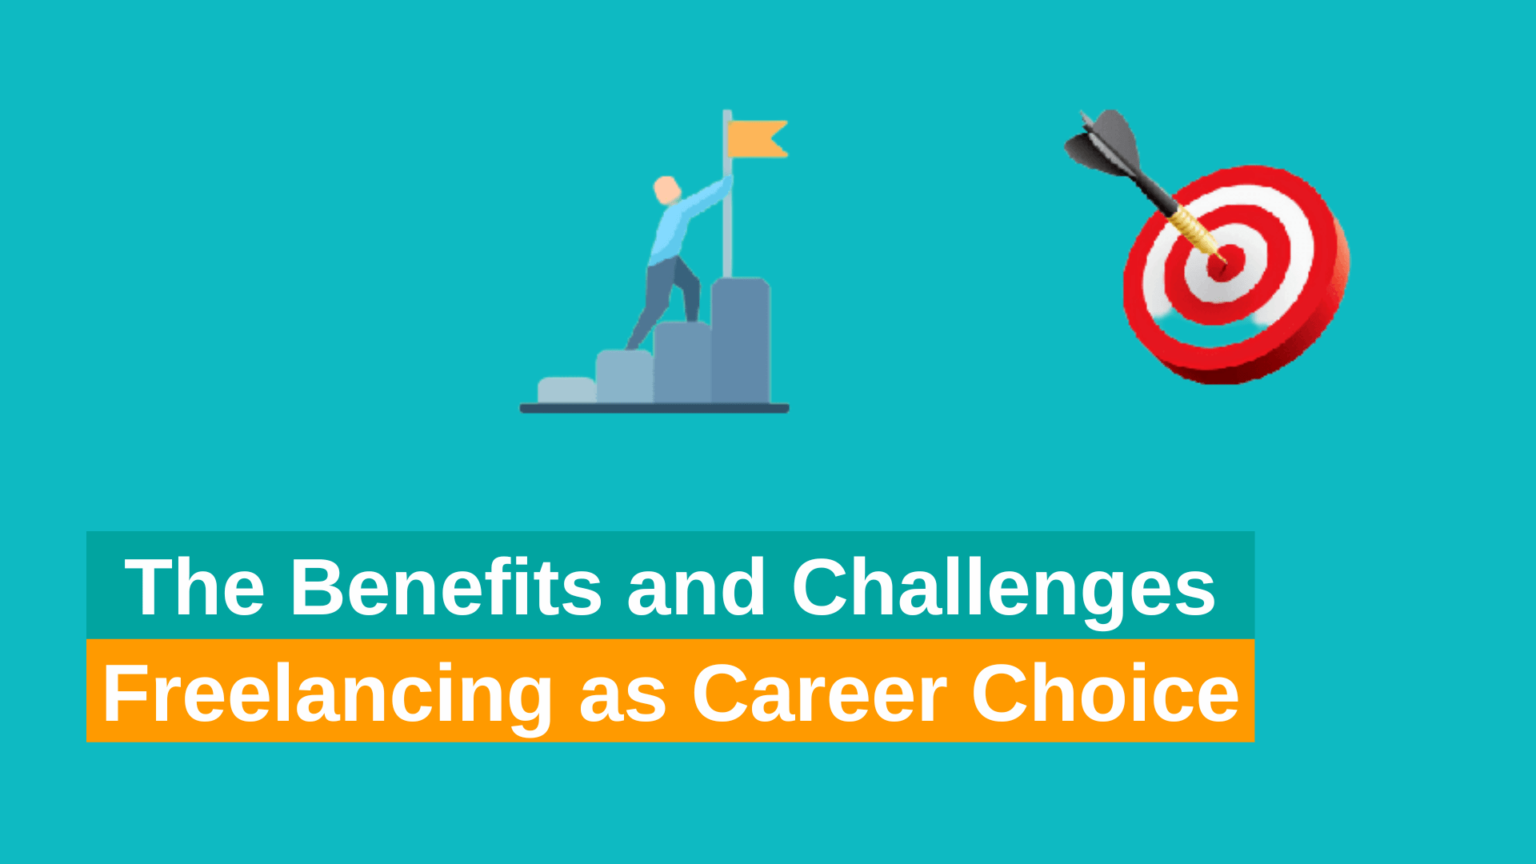 The benefits and challenges of freelancing as a career choice